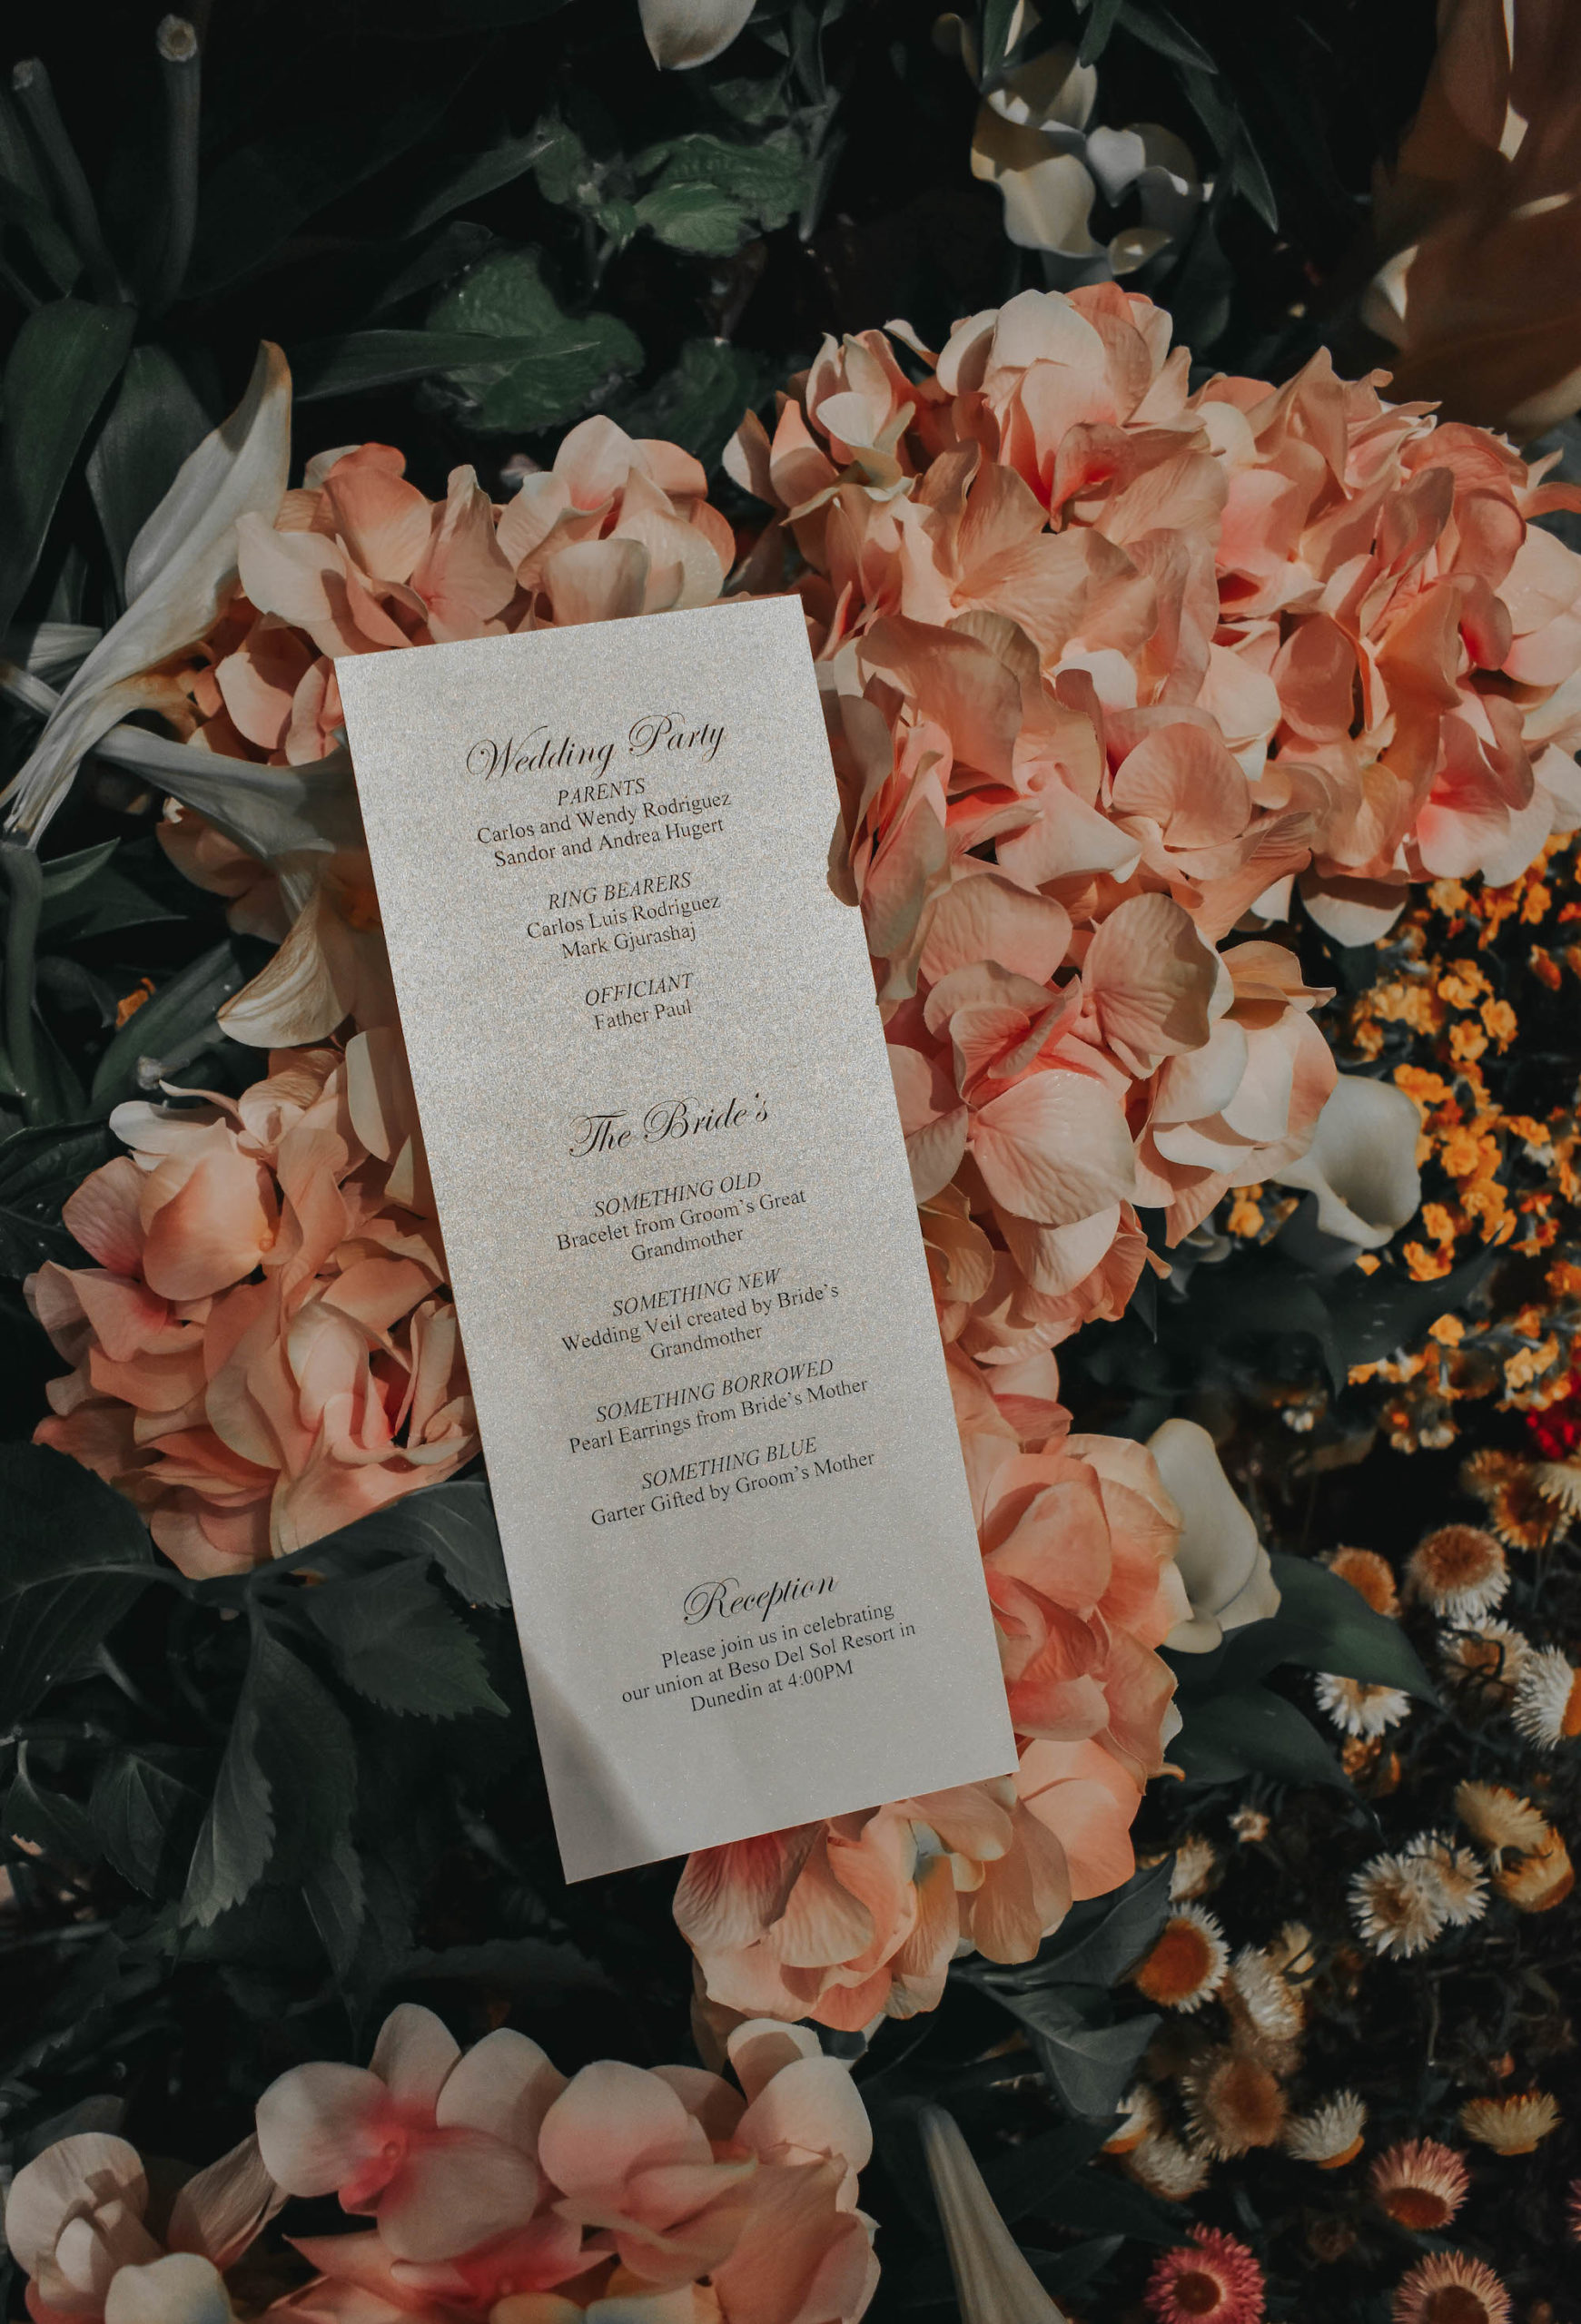 Classic Black and White Script Florida Wedding Ceremony Program, Sitting on Pink Floral Backdrop